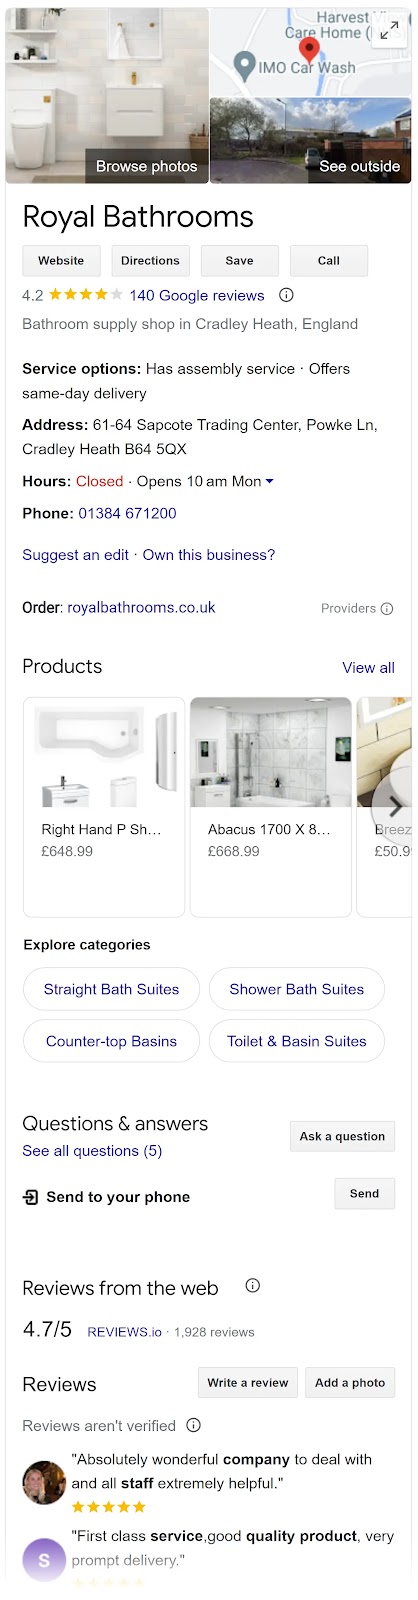 Google Business Profile for "Royal Bathrooms"